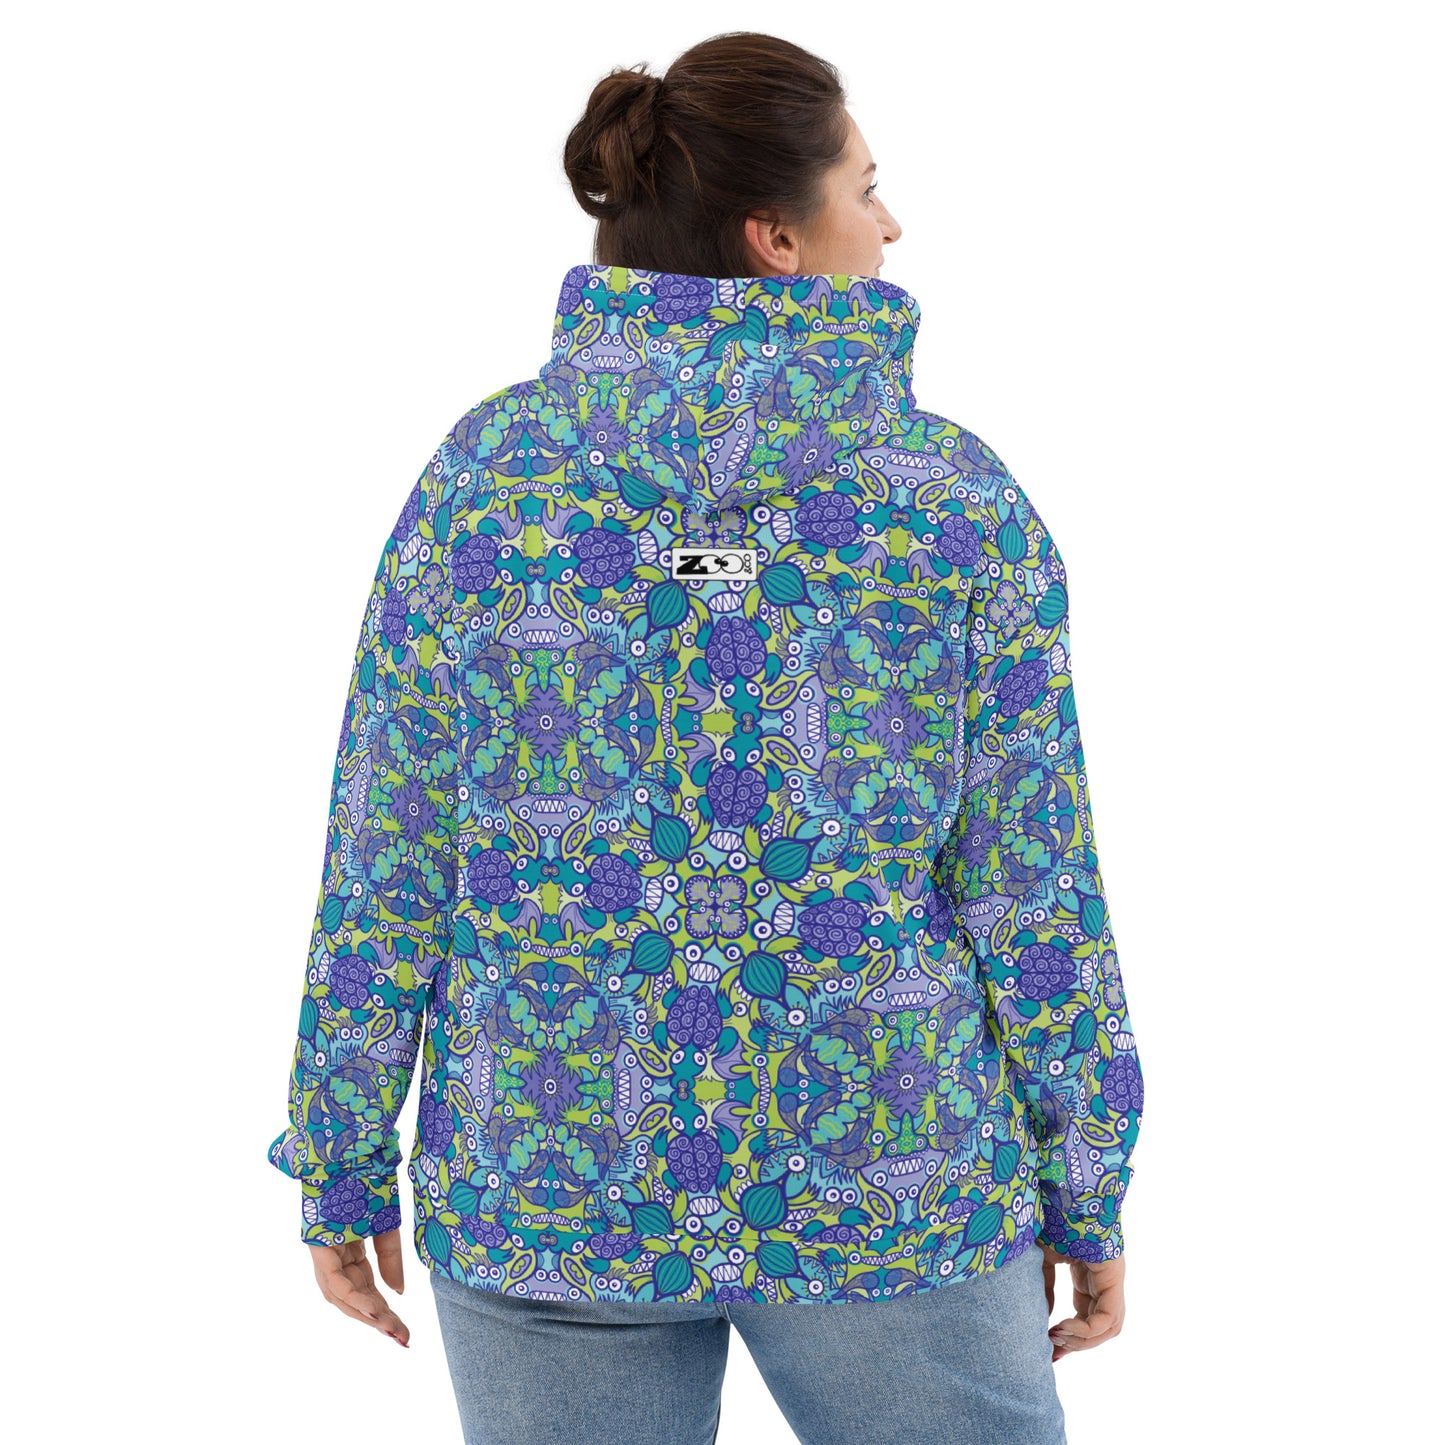 Once upon a time in an ocean full of life pattern design Unisex Hoodie. Back view